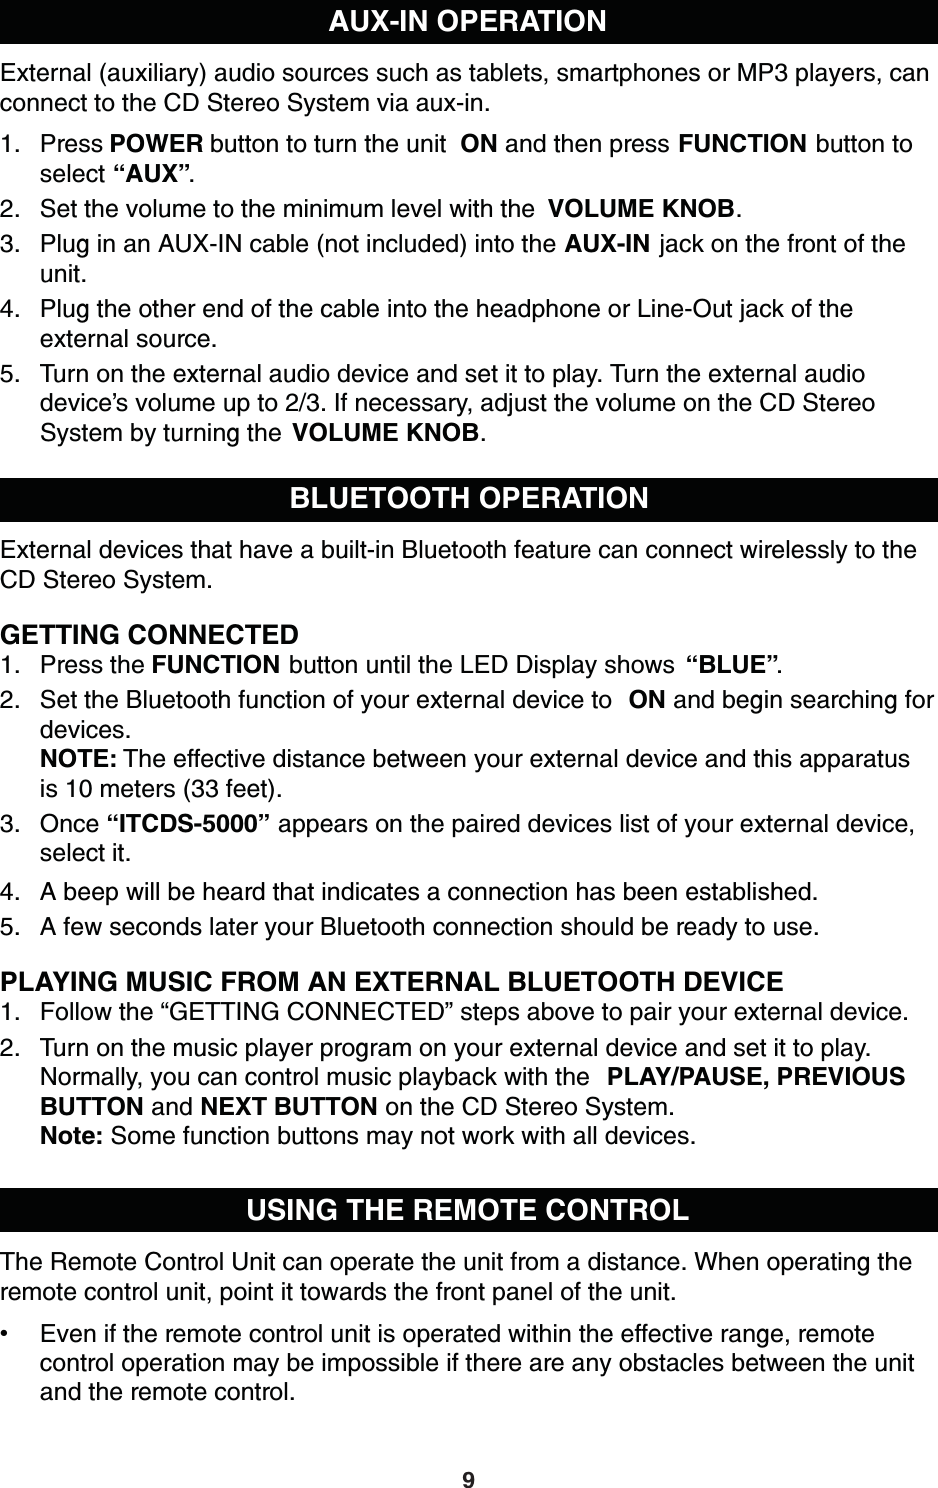 AUX-IN OPERATIONExternal (auxiliary) audio sources such as tablets, smartphones or MP3 players, can connect to the CD Stereo System via aux-in.1. Press POWER button to turn the unit  ON and then press FUNCTION button to select “AUX”.2. Set the volume to the minimum level with the  VOLUME KNOB.3. Plug in an AUX-IN cable (not included) into the AUX-IN jack on the front of the unit.4. Plug the other end of the cable into the headphone or Line-Out jack of the external source.5. Turn on the external audio device and set it to play. Turn the external audio device’s volume up to 2/3. If necessary, adjust the volume on the CD StereoSystem by turning the  VOLUME KNOB.BLUETOOTH OPERATIONExternal devices that have a built-in Bluetooth feature can connect wirelessly to the CD Stereo System.GETTING CONNECTED1. Press the FUNCTION button until the LED Display shows  “BLUE”.2. Set the Bluetooth function of your external device to  ON and begin searching for devices.NOTE: The effective distance between your external device and this apparatus is 10 meters (33 feet).3. Once “ITCDS-5000” appears on the paired devices list of your external device, select it.4. A beep will be heard that indicates a connection has been established. 5. A few seconds later your Bluetooth connection should be ready to use.PLAYING MUSIC FROM AN EXTERNAL BLUETOOTH DEVICE1. Follow the “GETTING CONNECTED” steps above to pair your external device.2. Turn on the music player program on your external device and set it to play.Normally, you can control music playback with the  PLAY/PAUSE, PREVIOUS BUTTON and NEXT BUTTON on the CD Stereo System.Note: Some function buttons may not work with all devices.USING THE REMOTE CONTROLThe Remote Control Unit can operate the unit from a distance. When operating the remote control unit, point it towards the front panel of the unit.Even if the remote control unit is operated within the effective range, remotecontrol operation may be impossible if there are any obstacles between the unit and the remote control.9